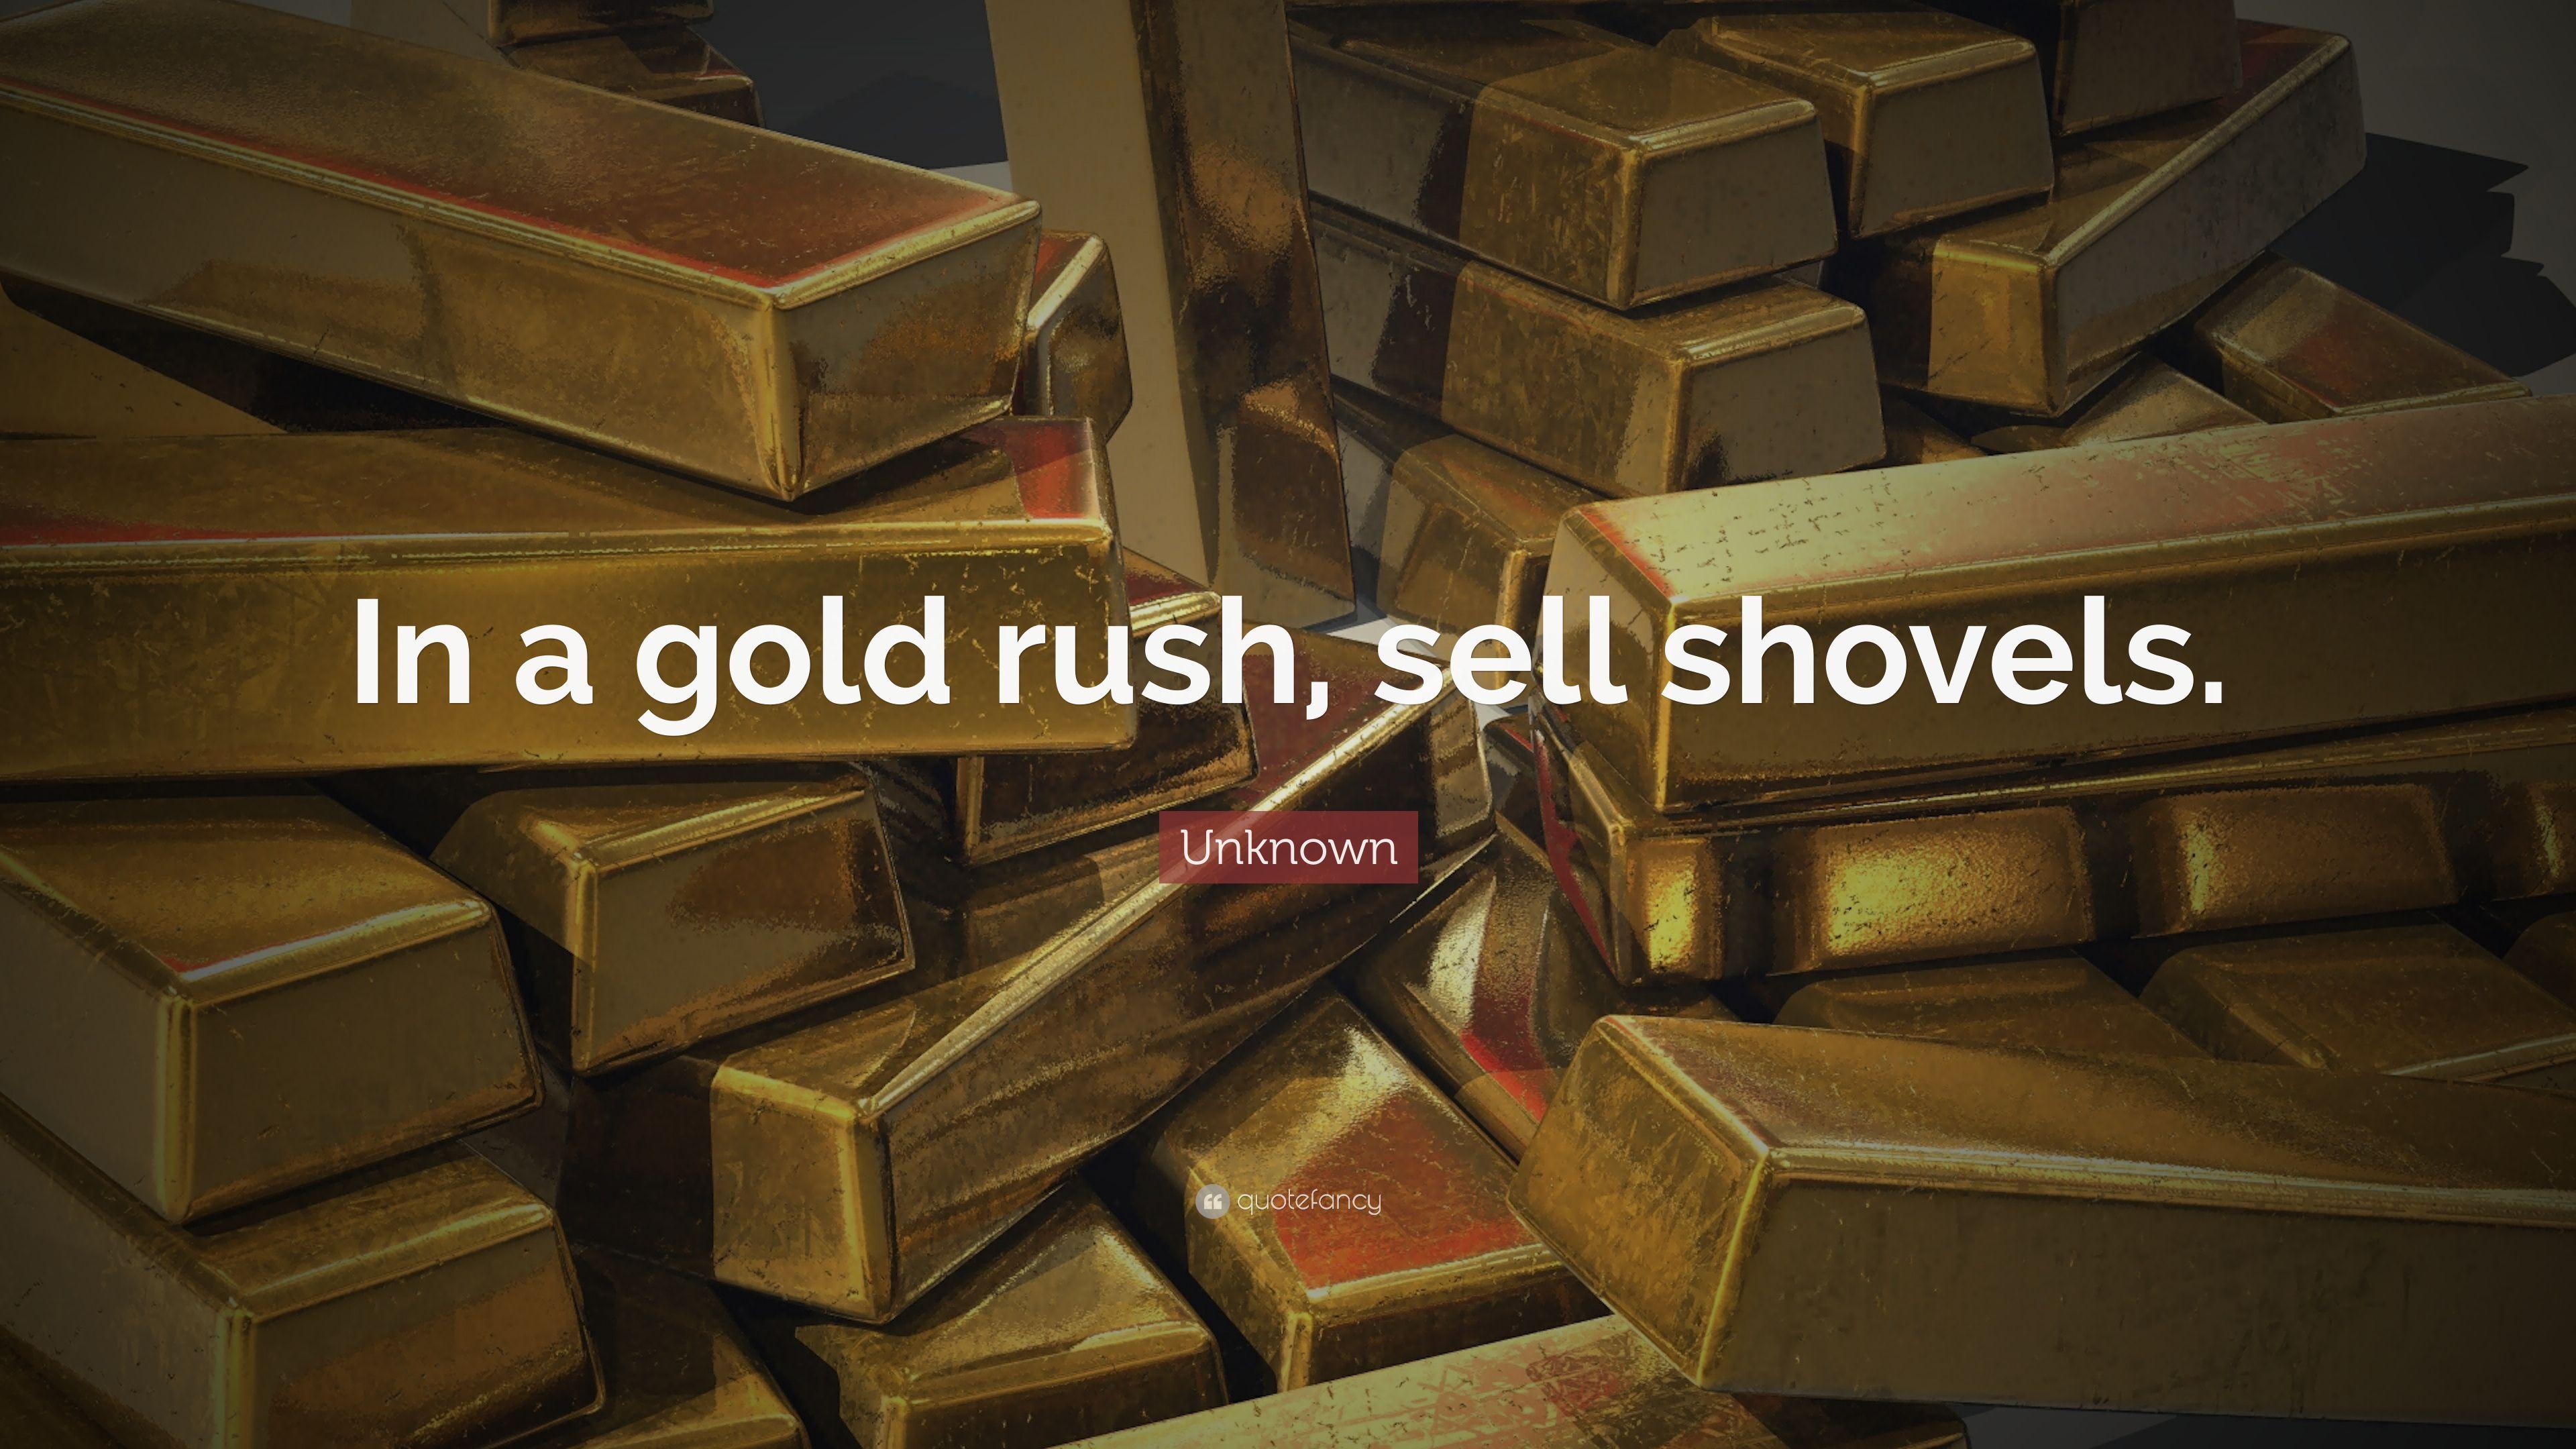 Unknown Quote: “In a gold rush, sell shovels.” 6 wallpaper